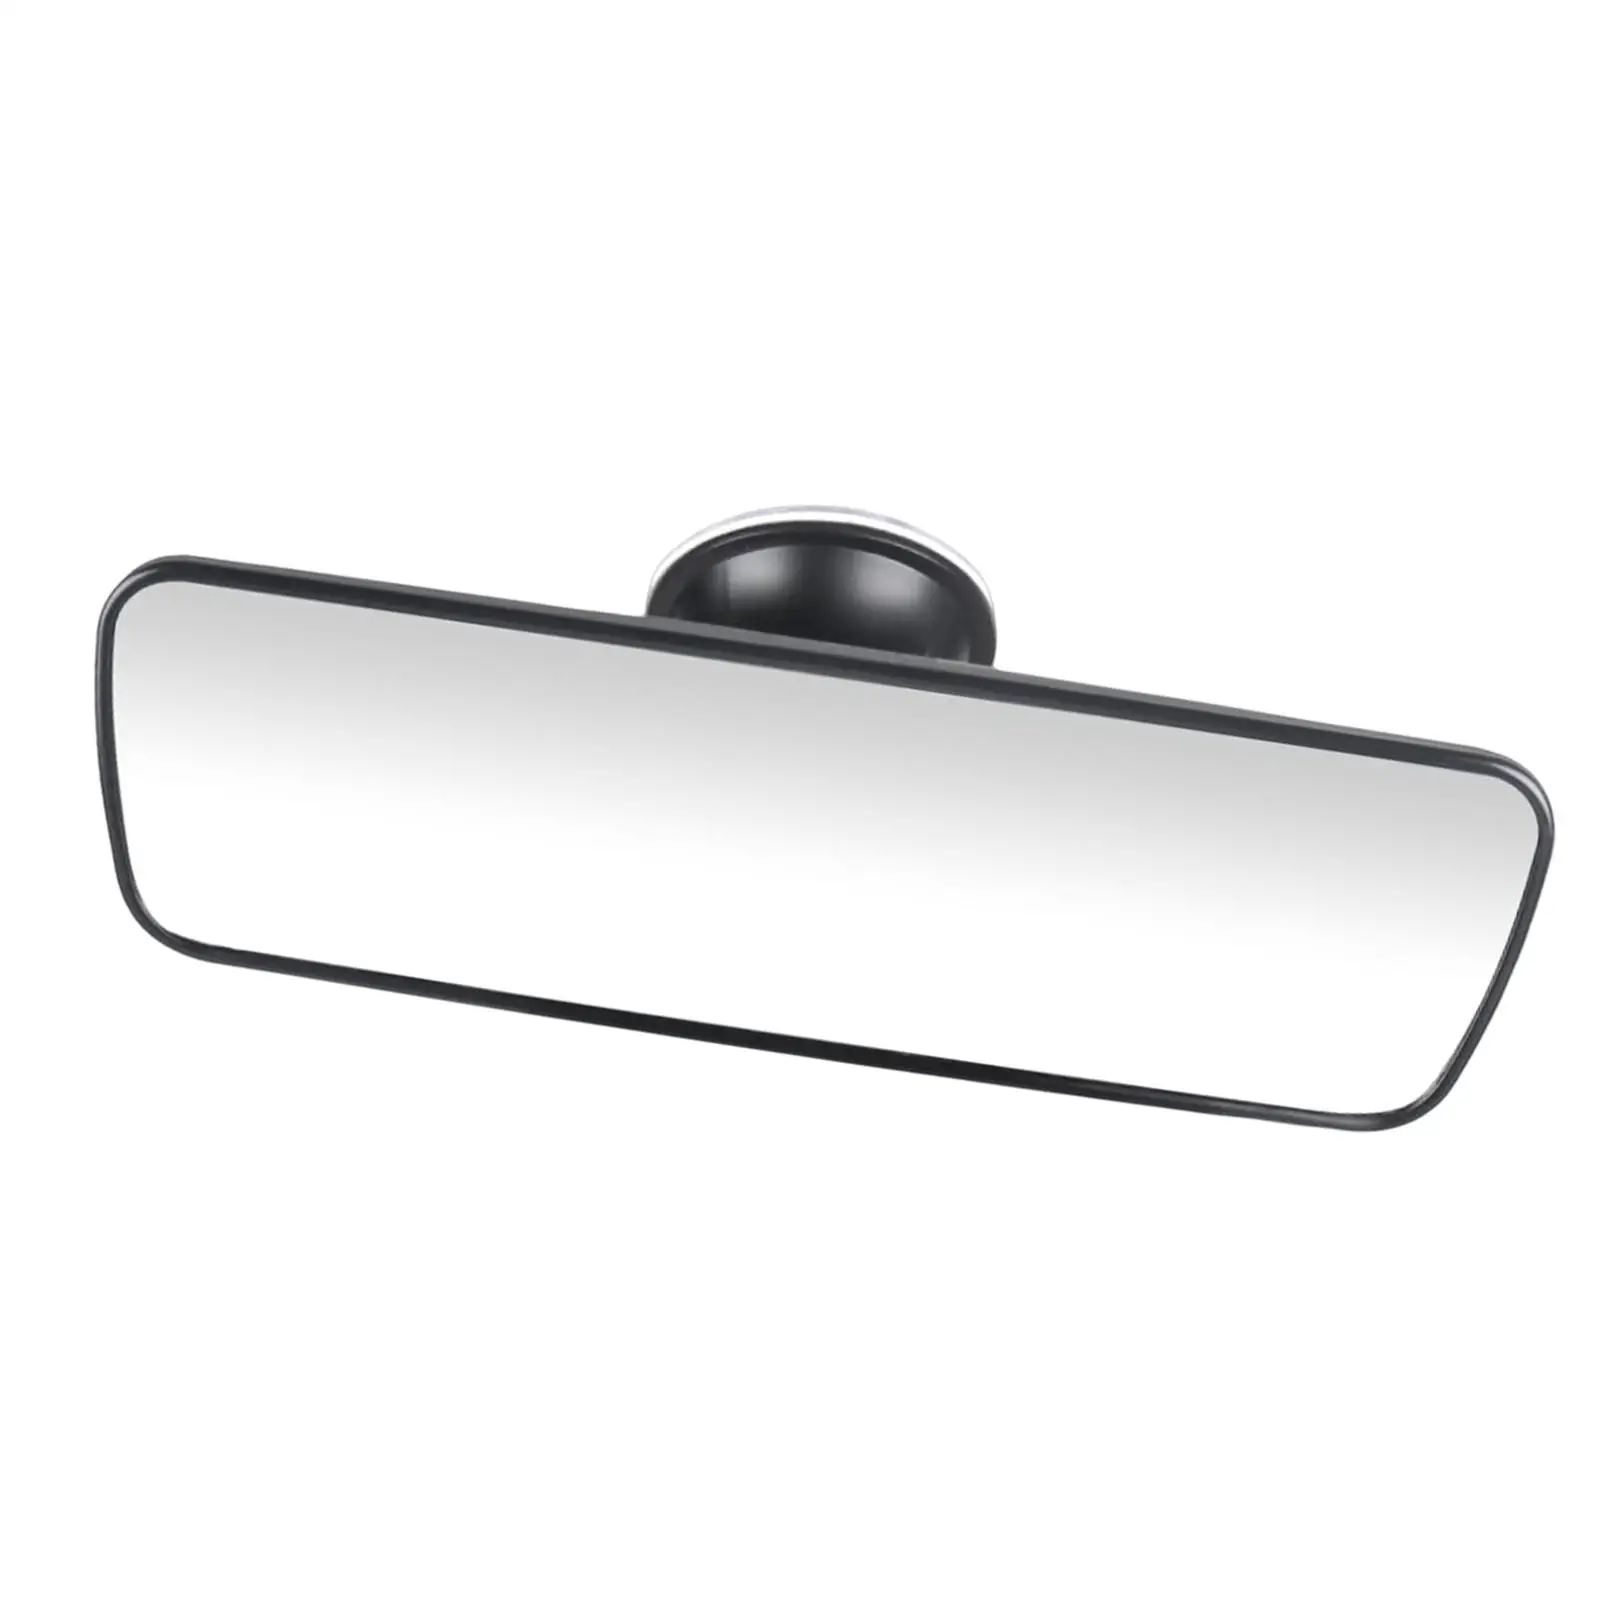 Car Interior Rear View Mirror, Durable Anti Glare with Suction Cup Auxiliary